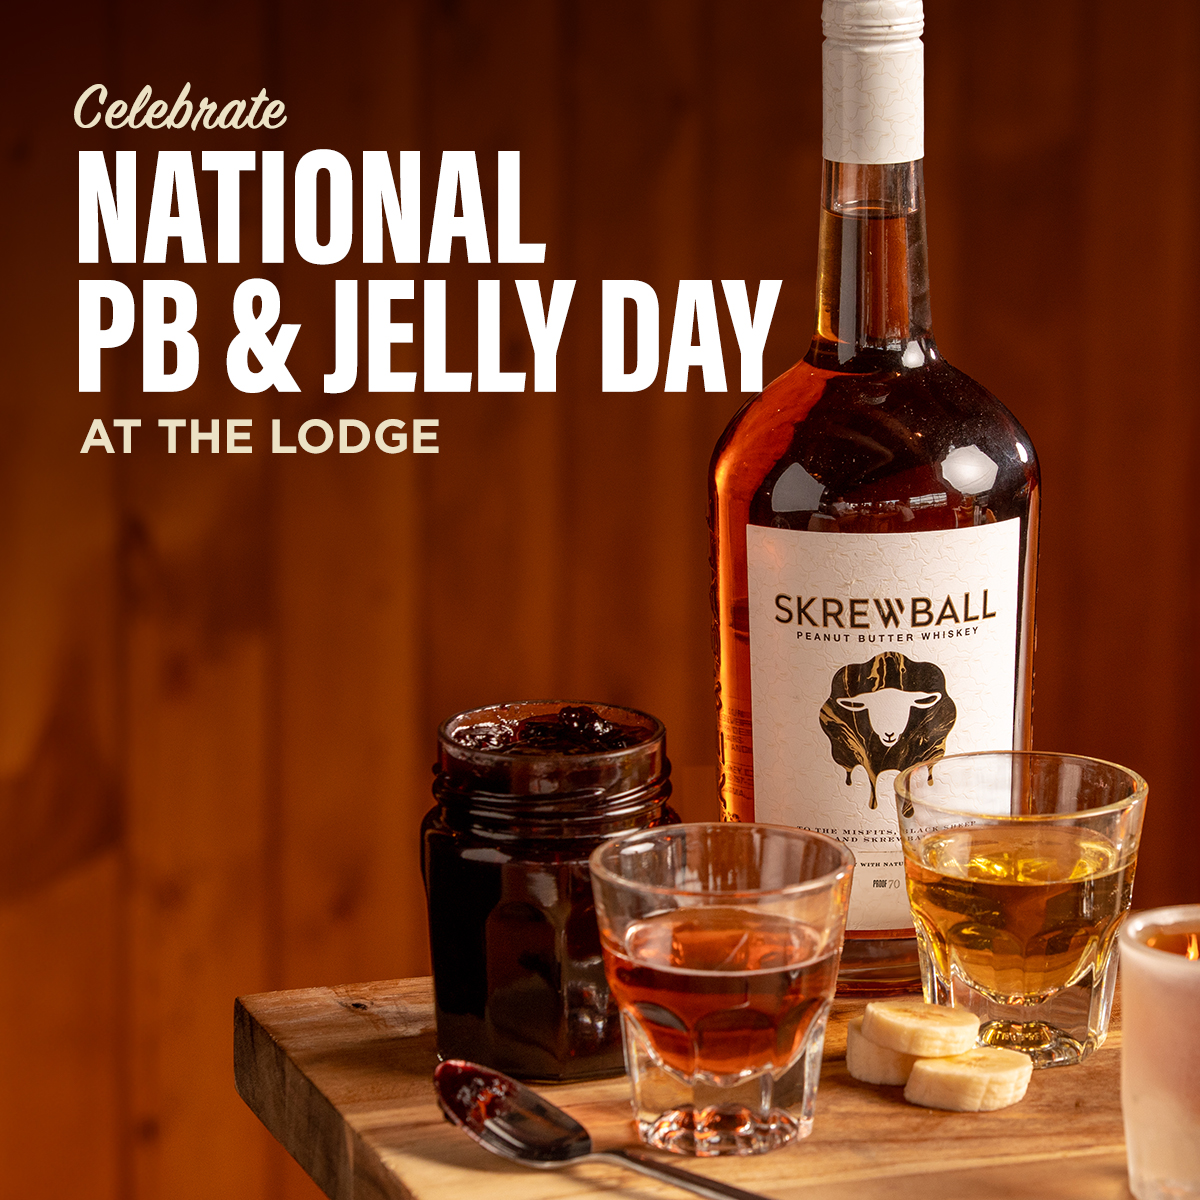 All kick. No crust. Celebrate National Peanut Butter & Jelly Day at the lodge with a smooth shot of Skrewball Whiskey and Raspberry Schnapps. #twinpeaksrestaurants #twinpeaksgirls #screwball #pbj #nationalpbjday